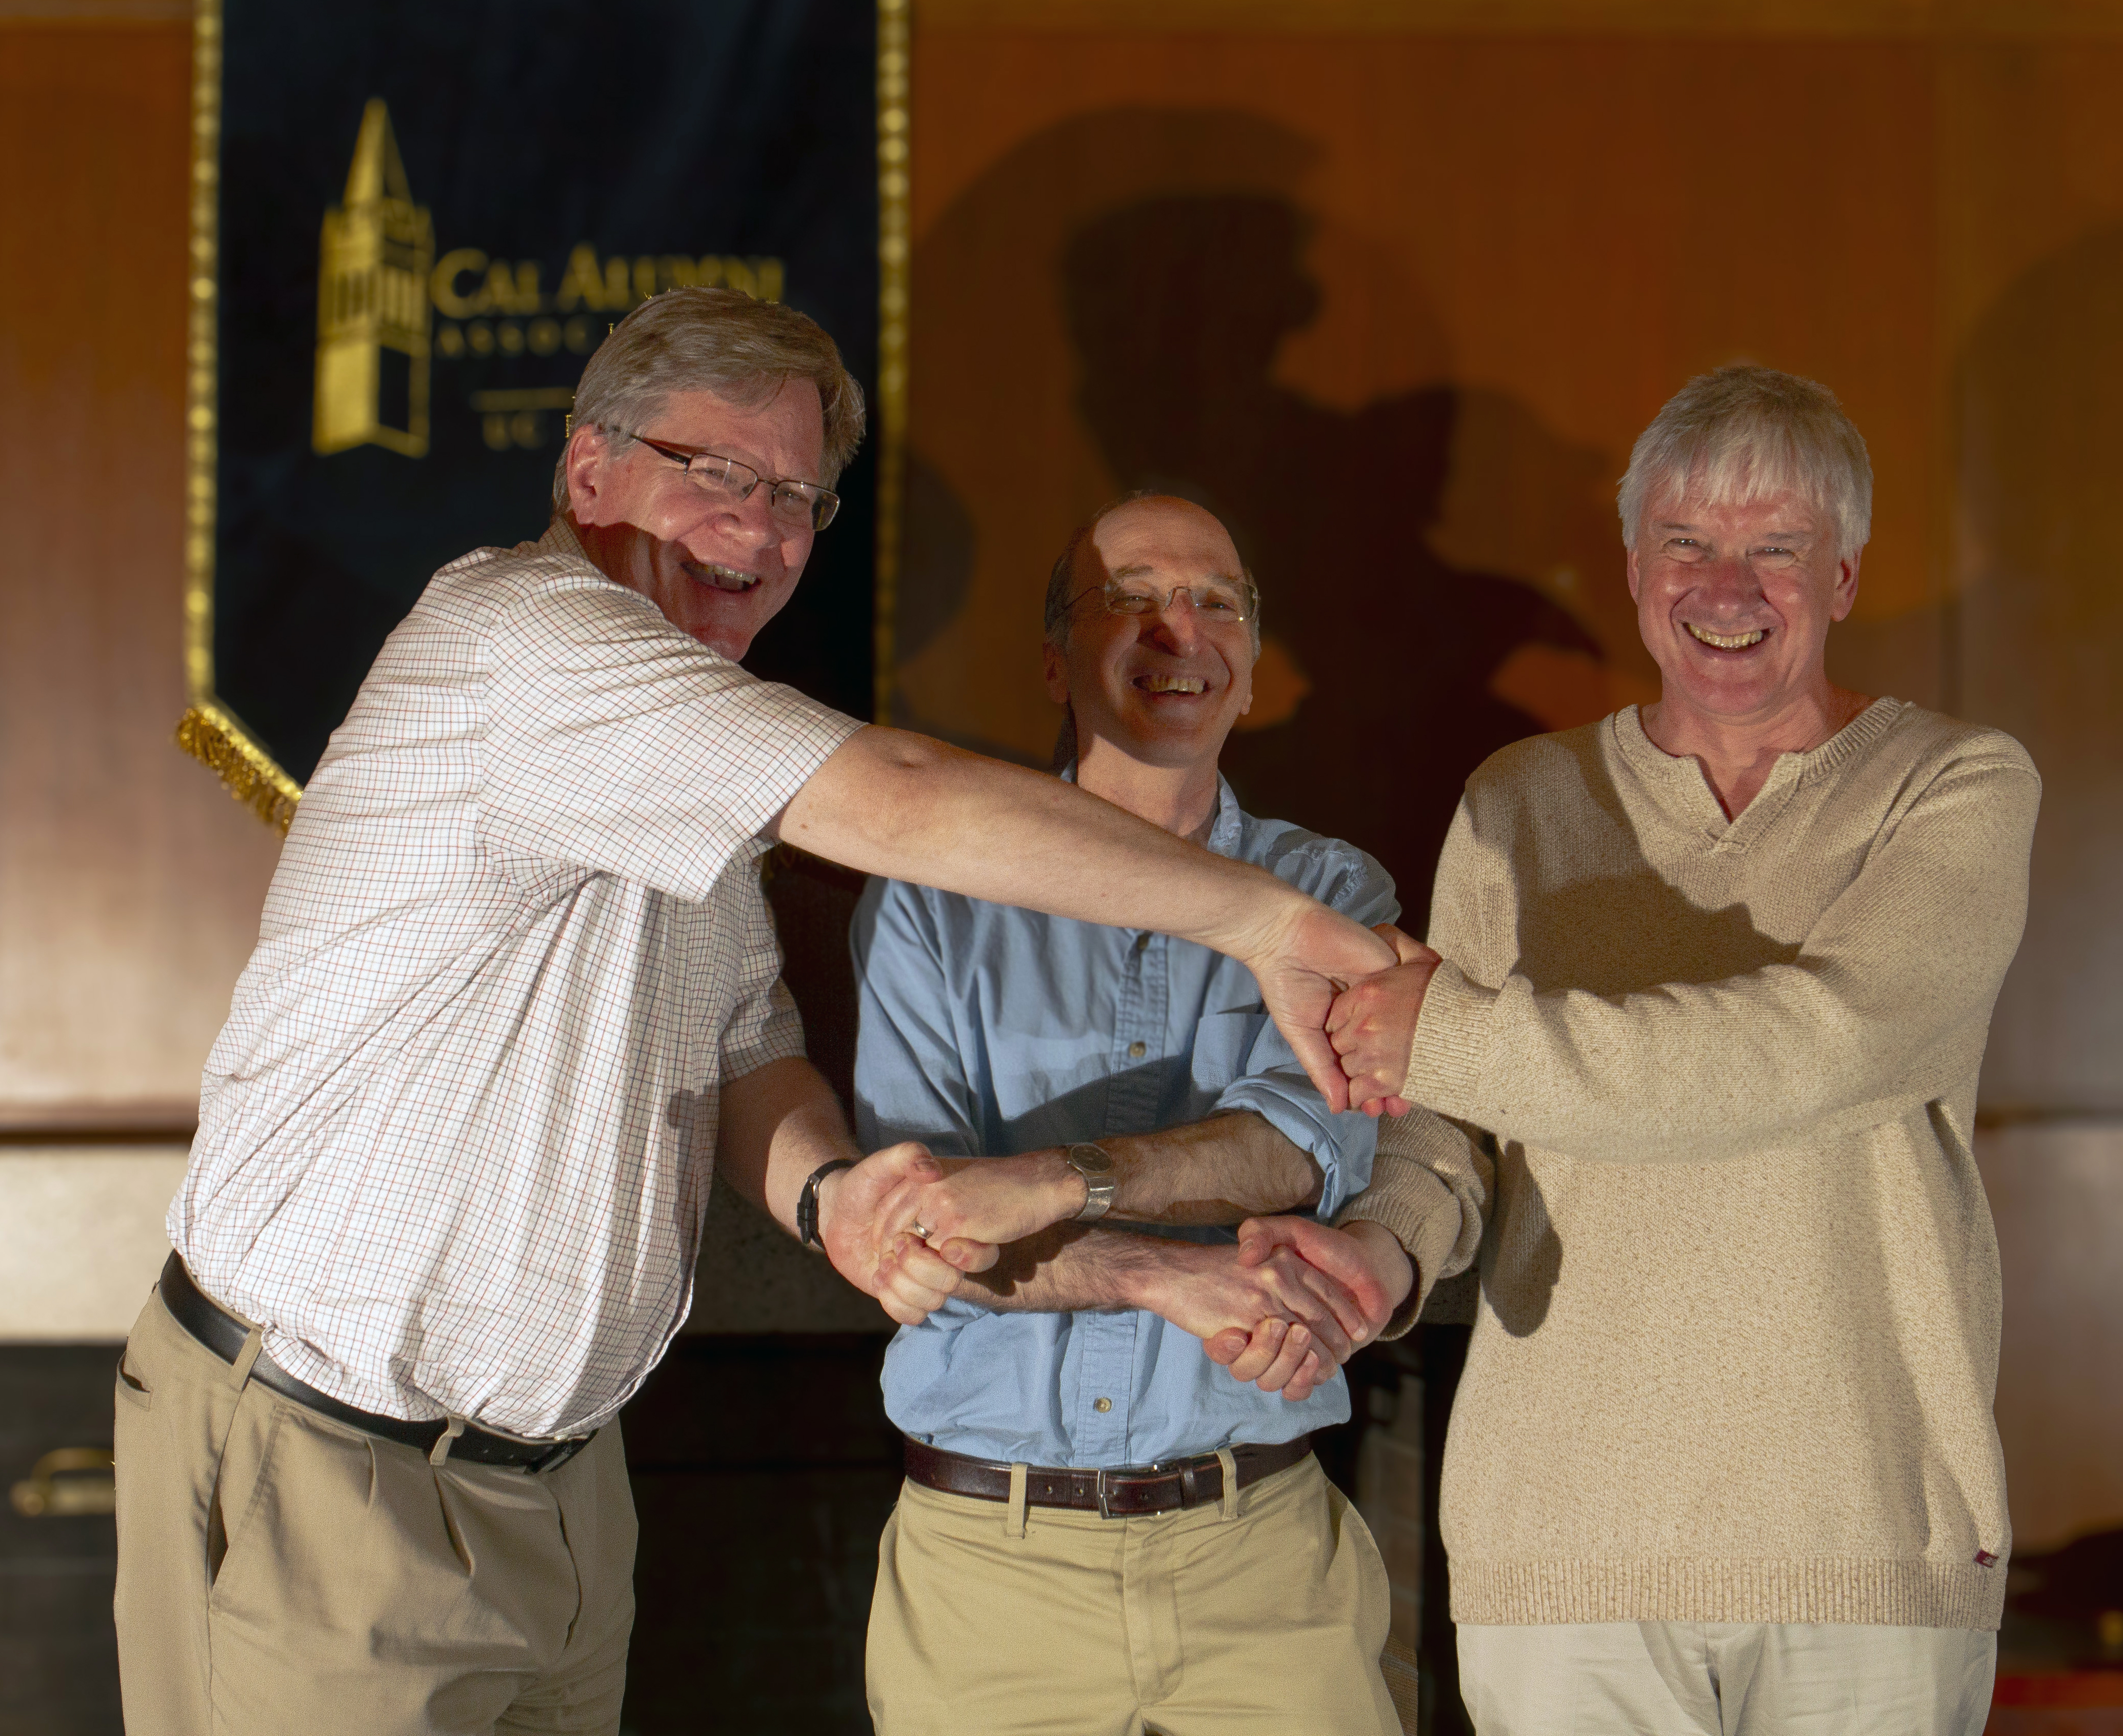 three smiling men linking arms in celebration